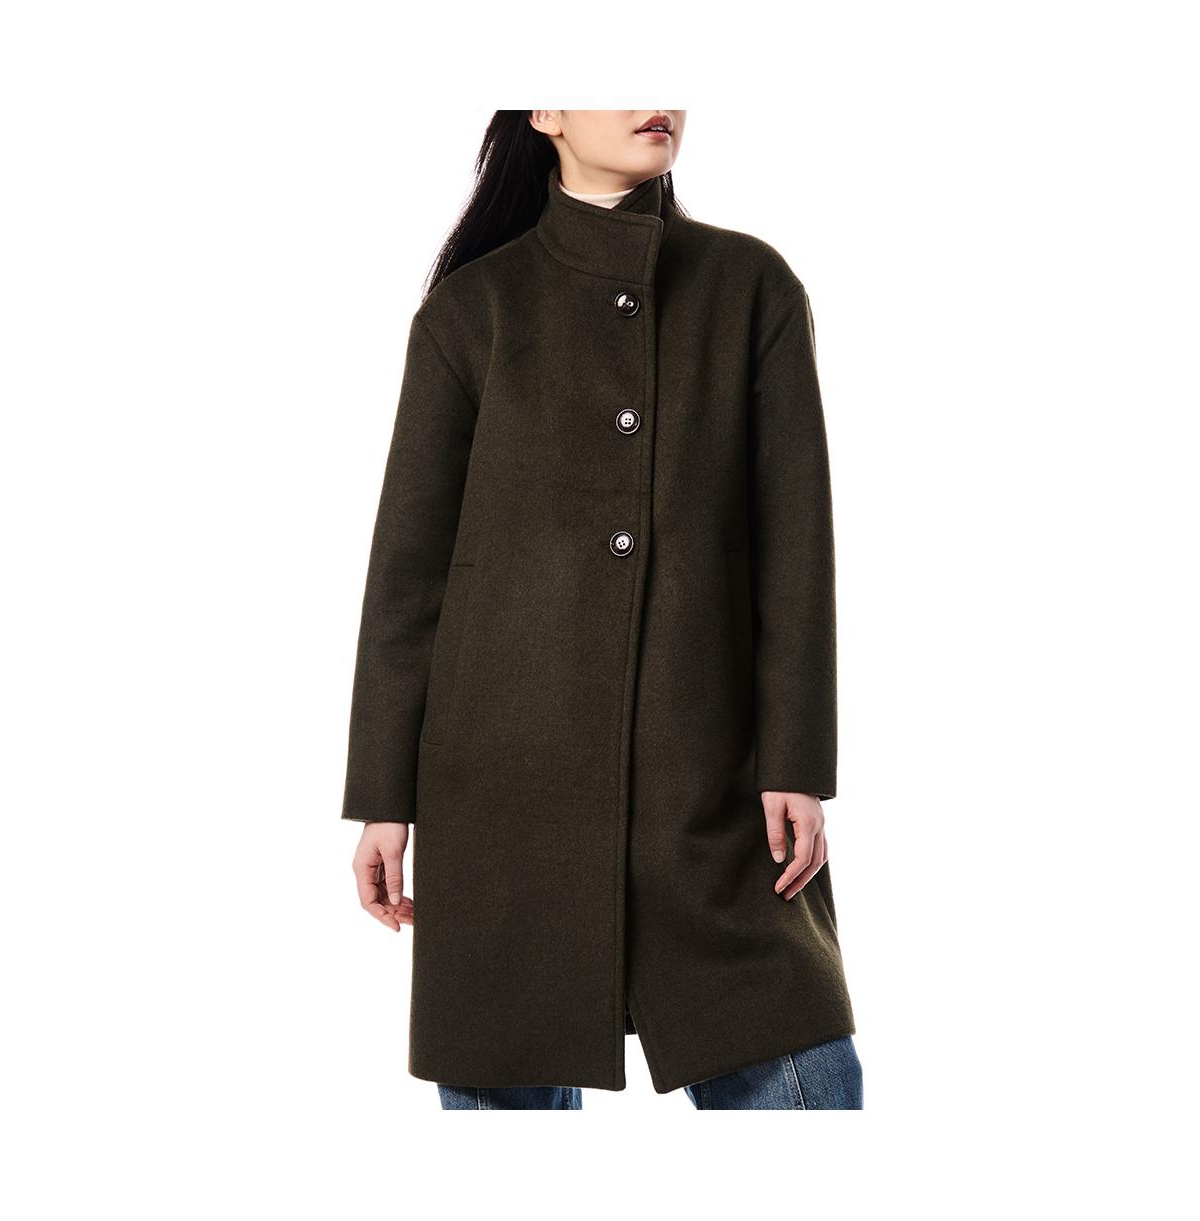 Womens Wool Coat with Stand Collar - Olive